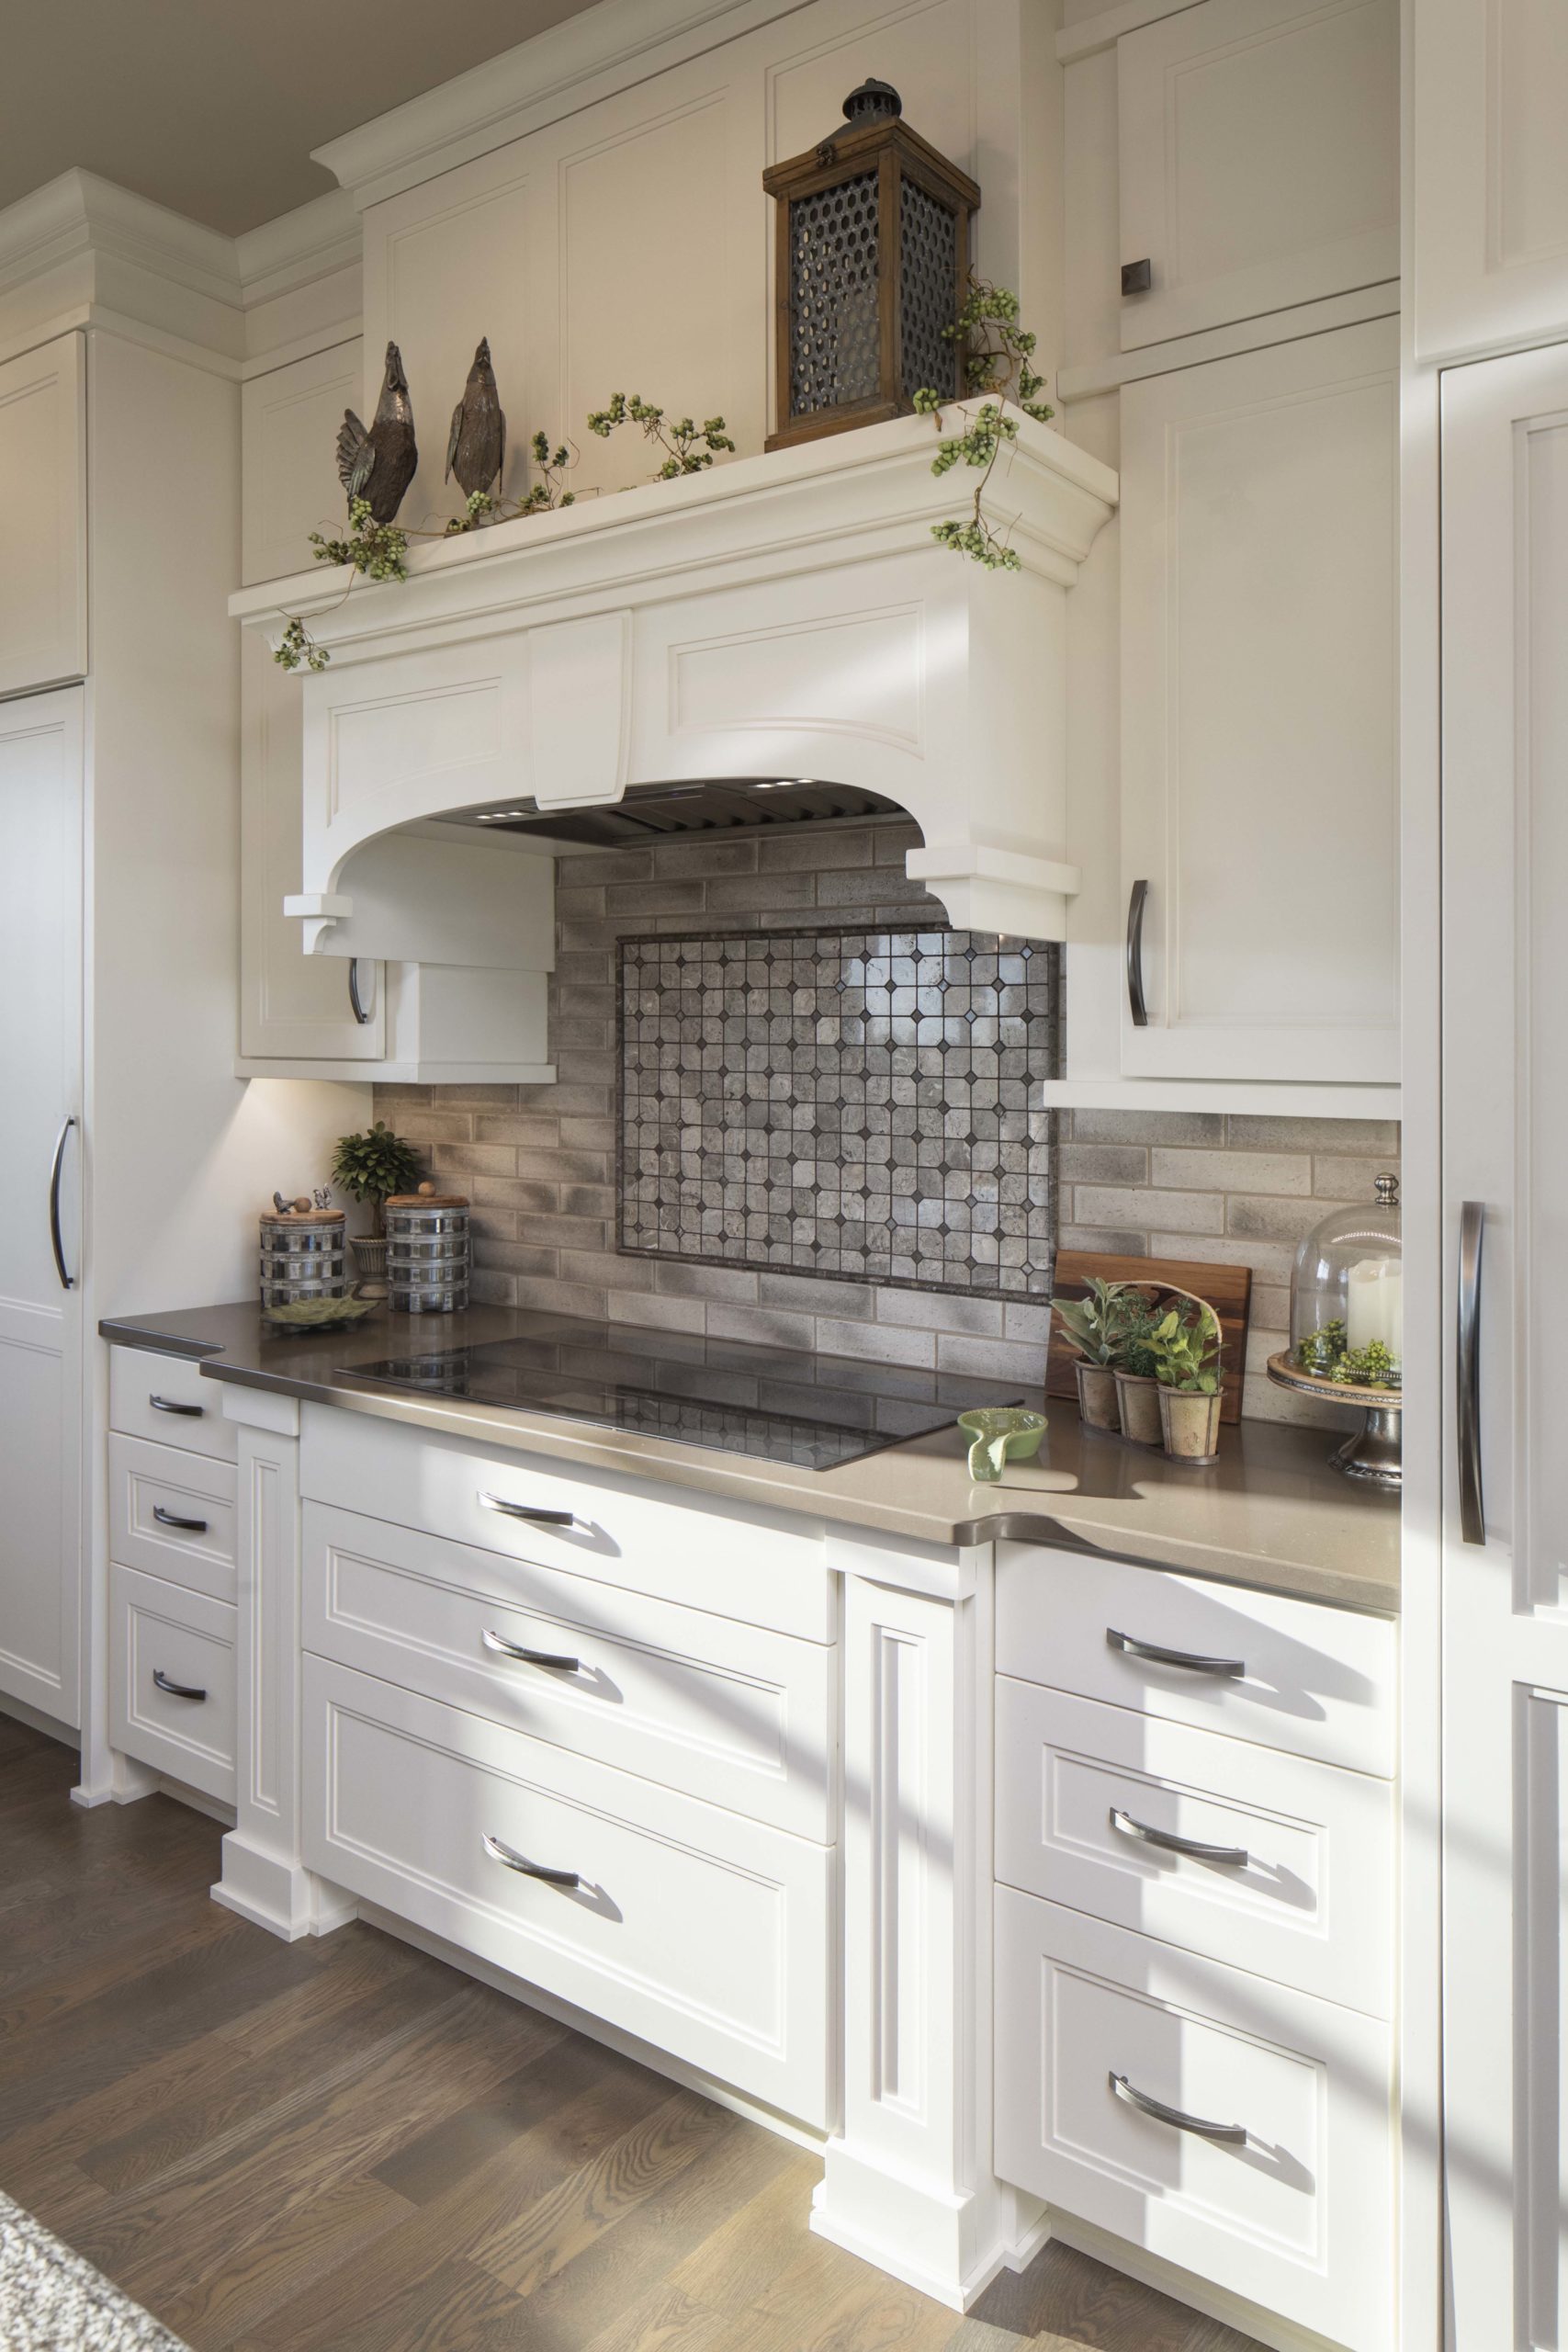 white cabinets in a kitchen with a tile backsplash behind the stove